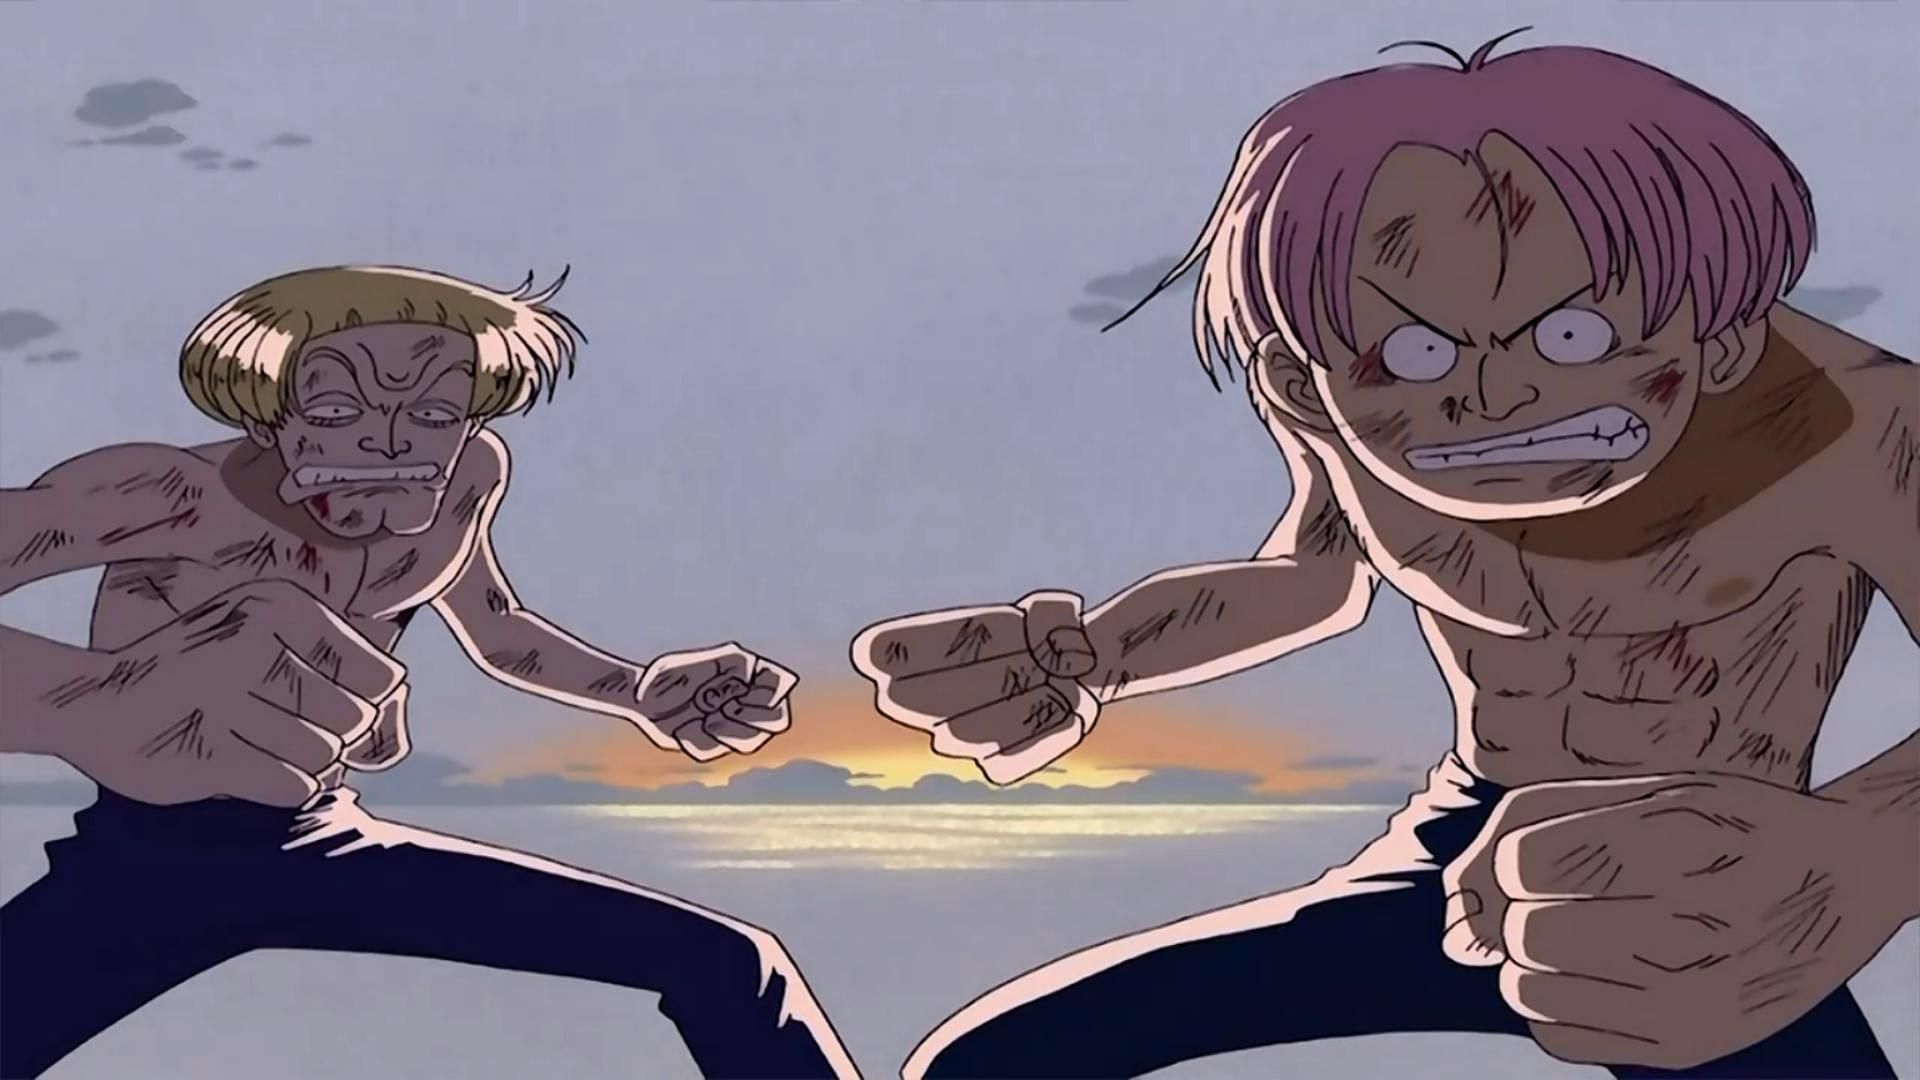 Garp&#039;s training forged two weaklings into respectable fighters (Image via Toei Animation, One Piece)